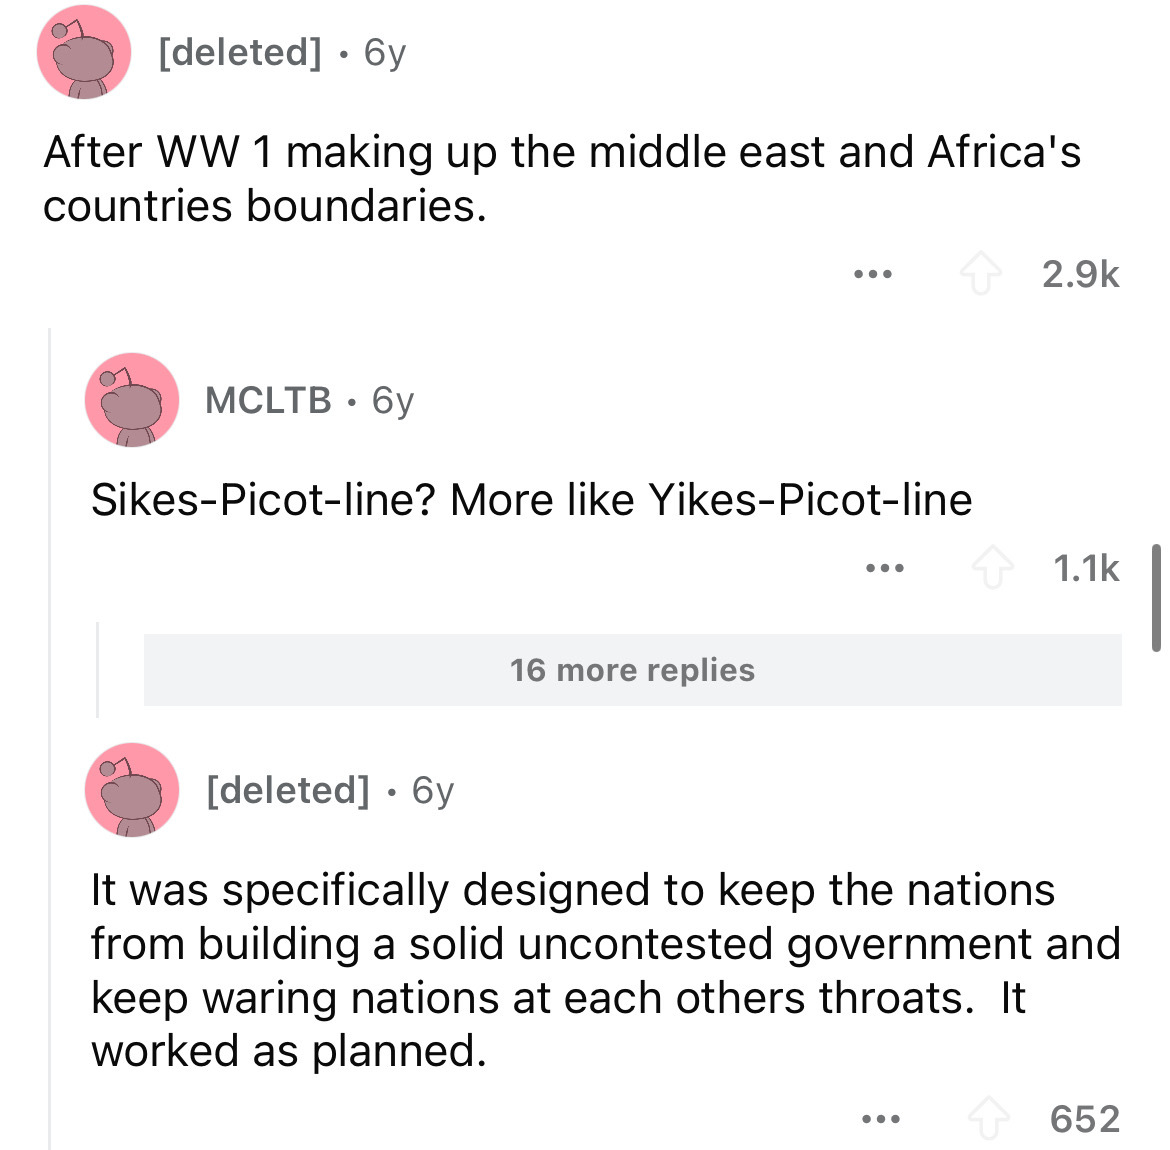 screenshot - deleted 6y After Ww 1 making up the middle east and Africa's countries boundaries. Mcltb 6y ... SikesPicotline? More YikesPicotline 16 more replies deleted 6y It was specifically designed to keep the nations from building a solid uncontested 